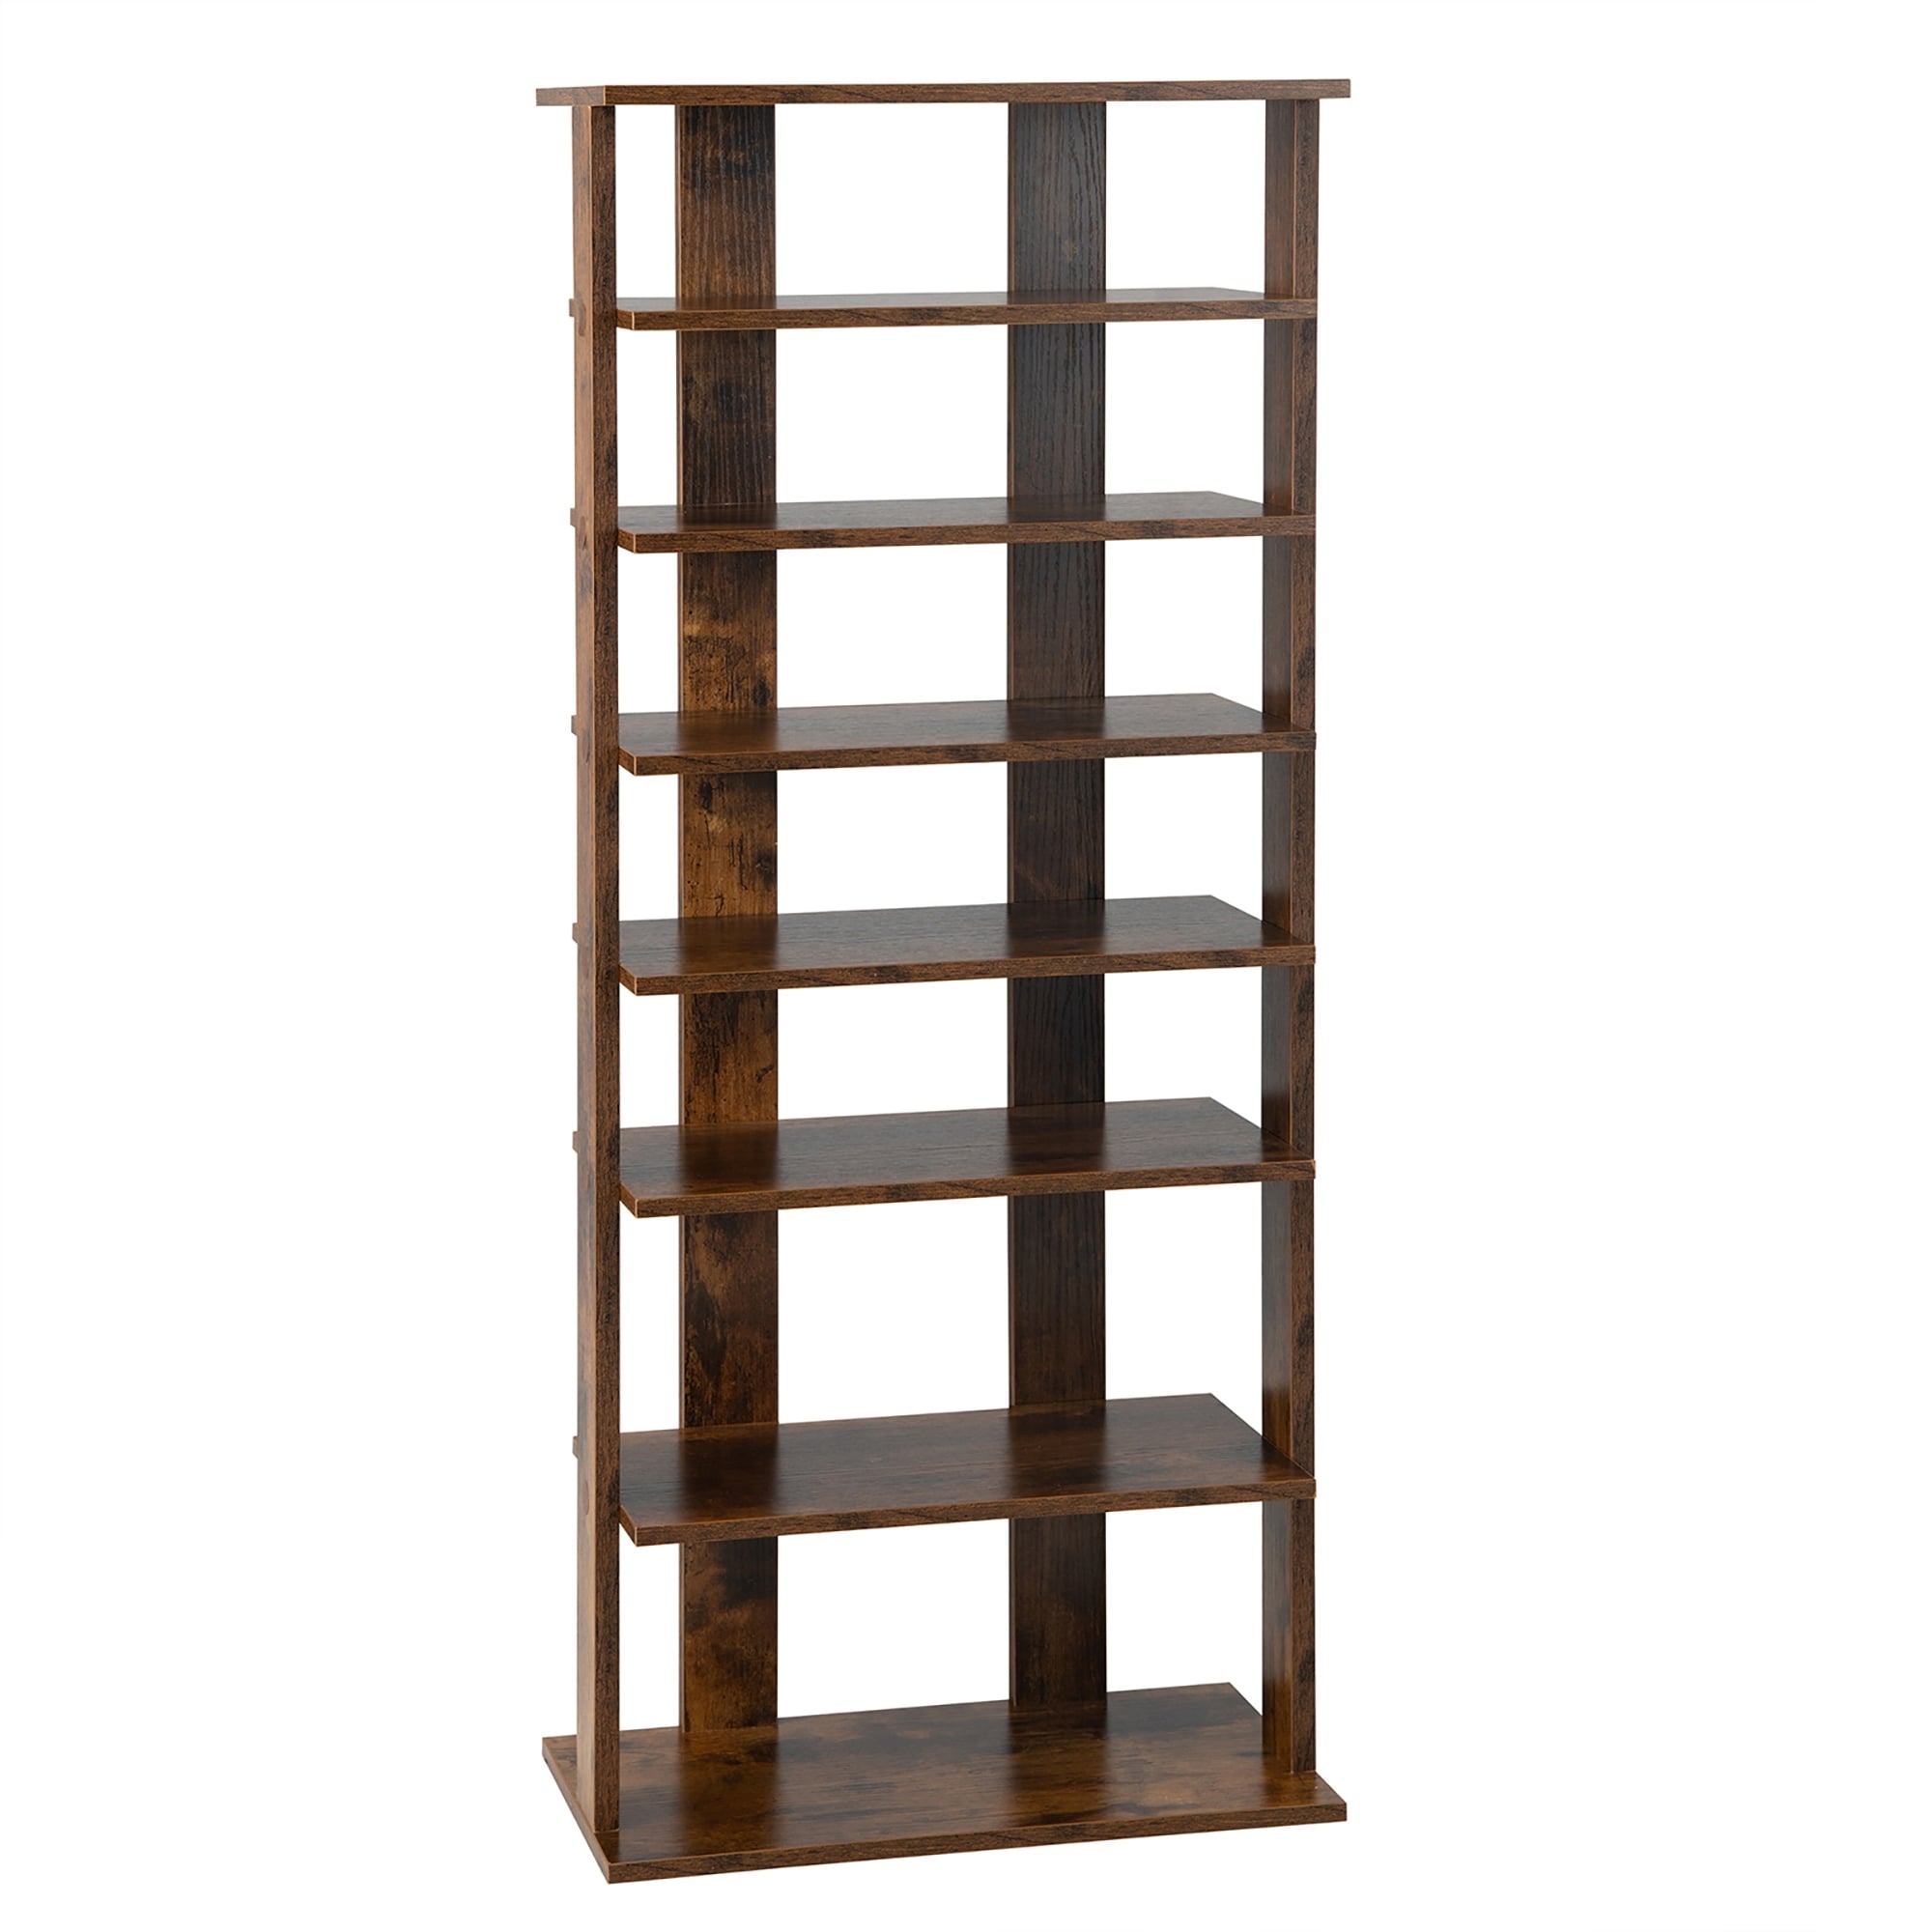 https://ak1.ostkcdn.com/images/products/is/images/direct/57fc410ae2073316b6df9345f9718b852d48e7f2/Costway-7-Tier-Double-Rows-Shoe-Rack-Vertical-Wooden-Shoe-Storage.jpg